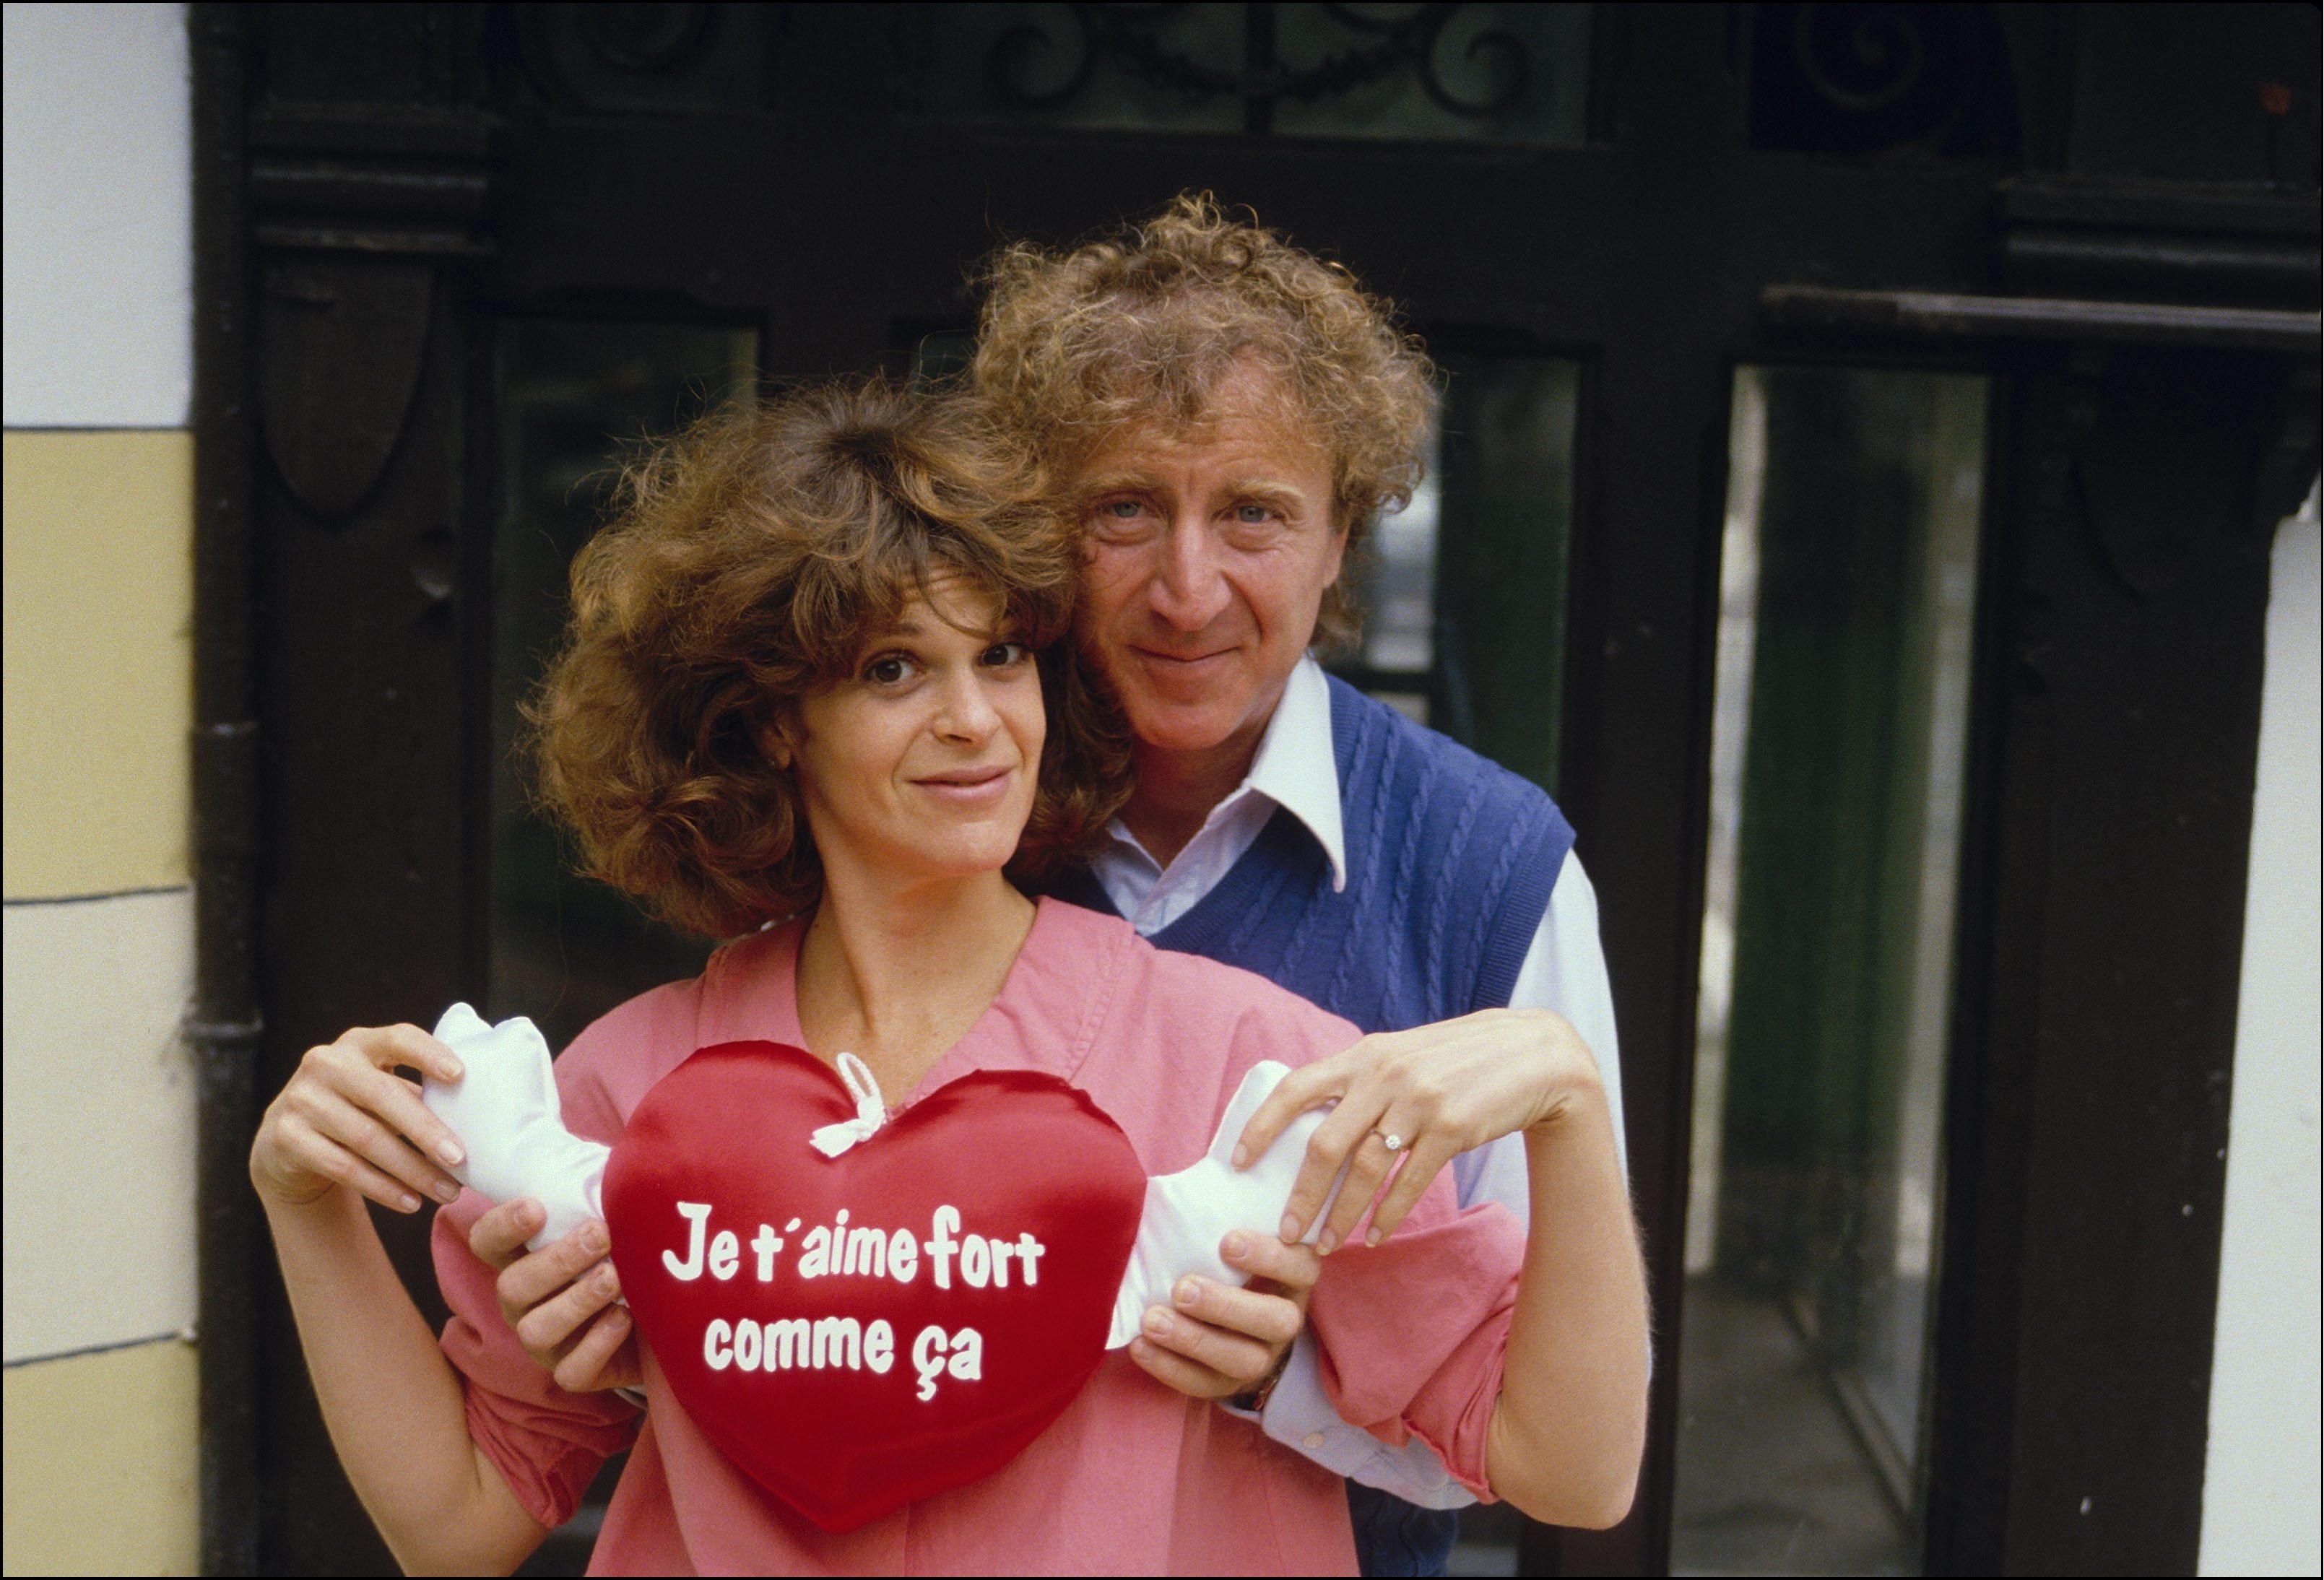 Gene Wilder and Gilda Radner at the Festival De Deauville on November 9, 1984, in Deauville, France. | Source: Getty Images